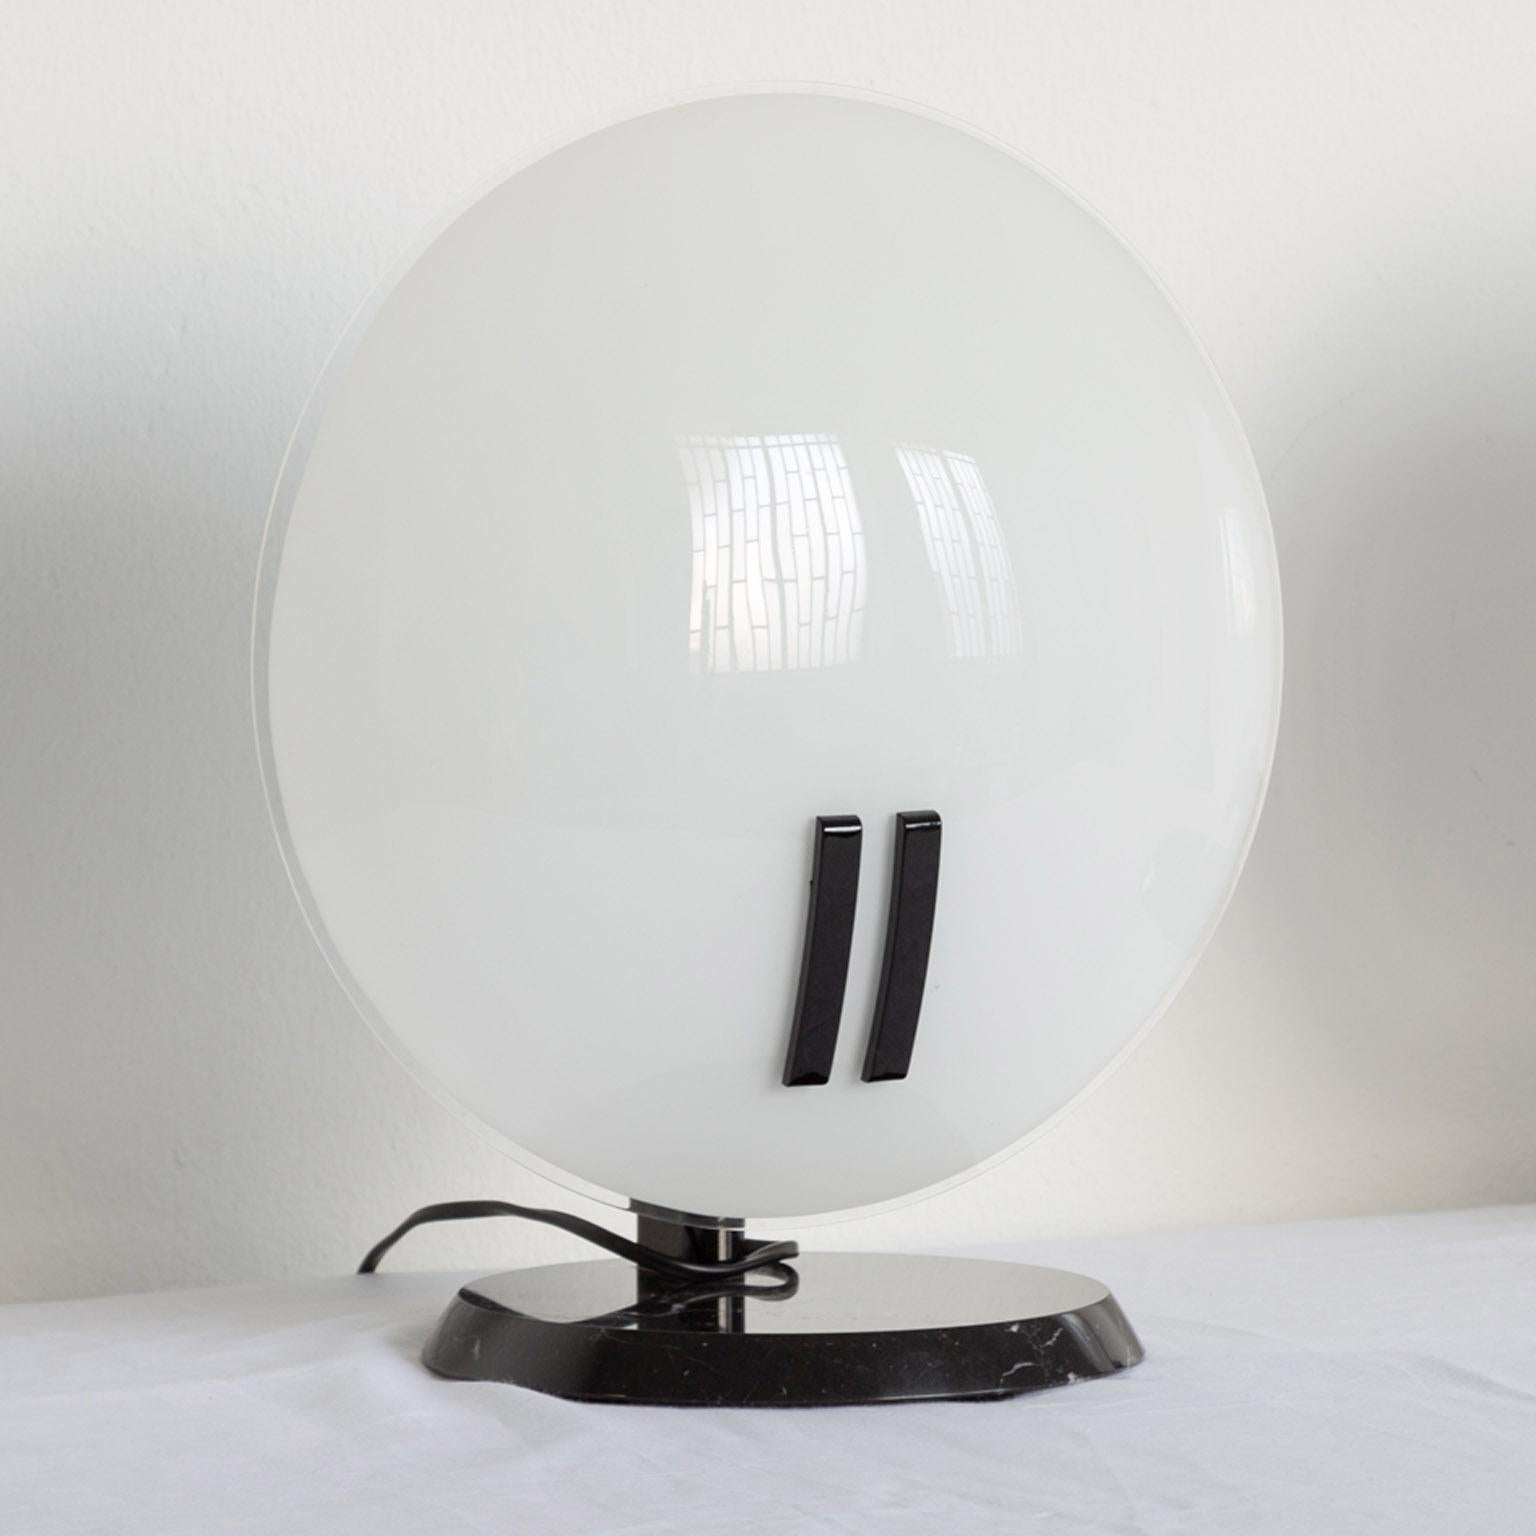 Fully functional pair of large pearl table lamp by Bruno Gecchelin for Oluce, 1980s.

Founded in 1945 by Giuseppe Ostuni, Oluce is the oldest active lighting design company in Italy. Highly influential in the midcentury, Oluce helped pave the way